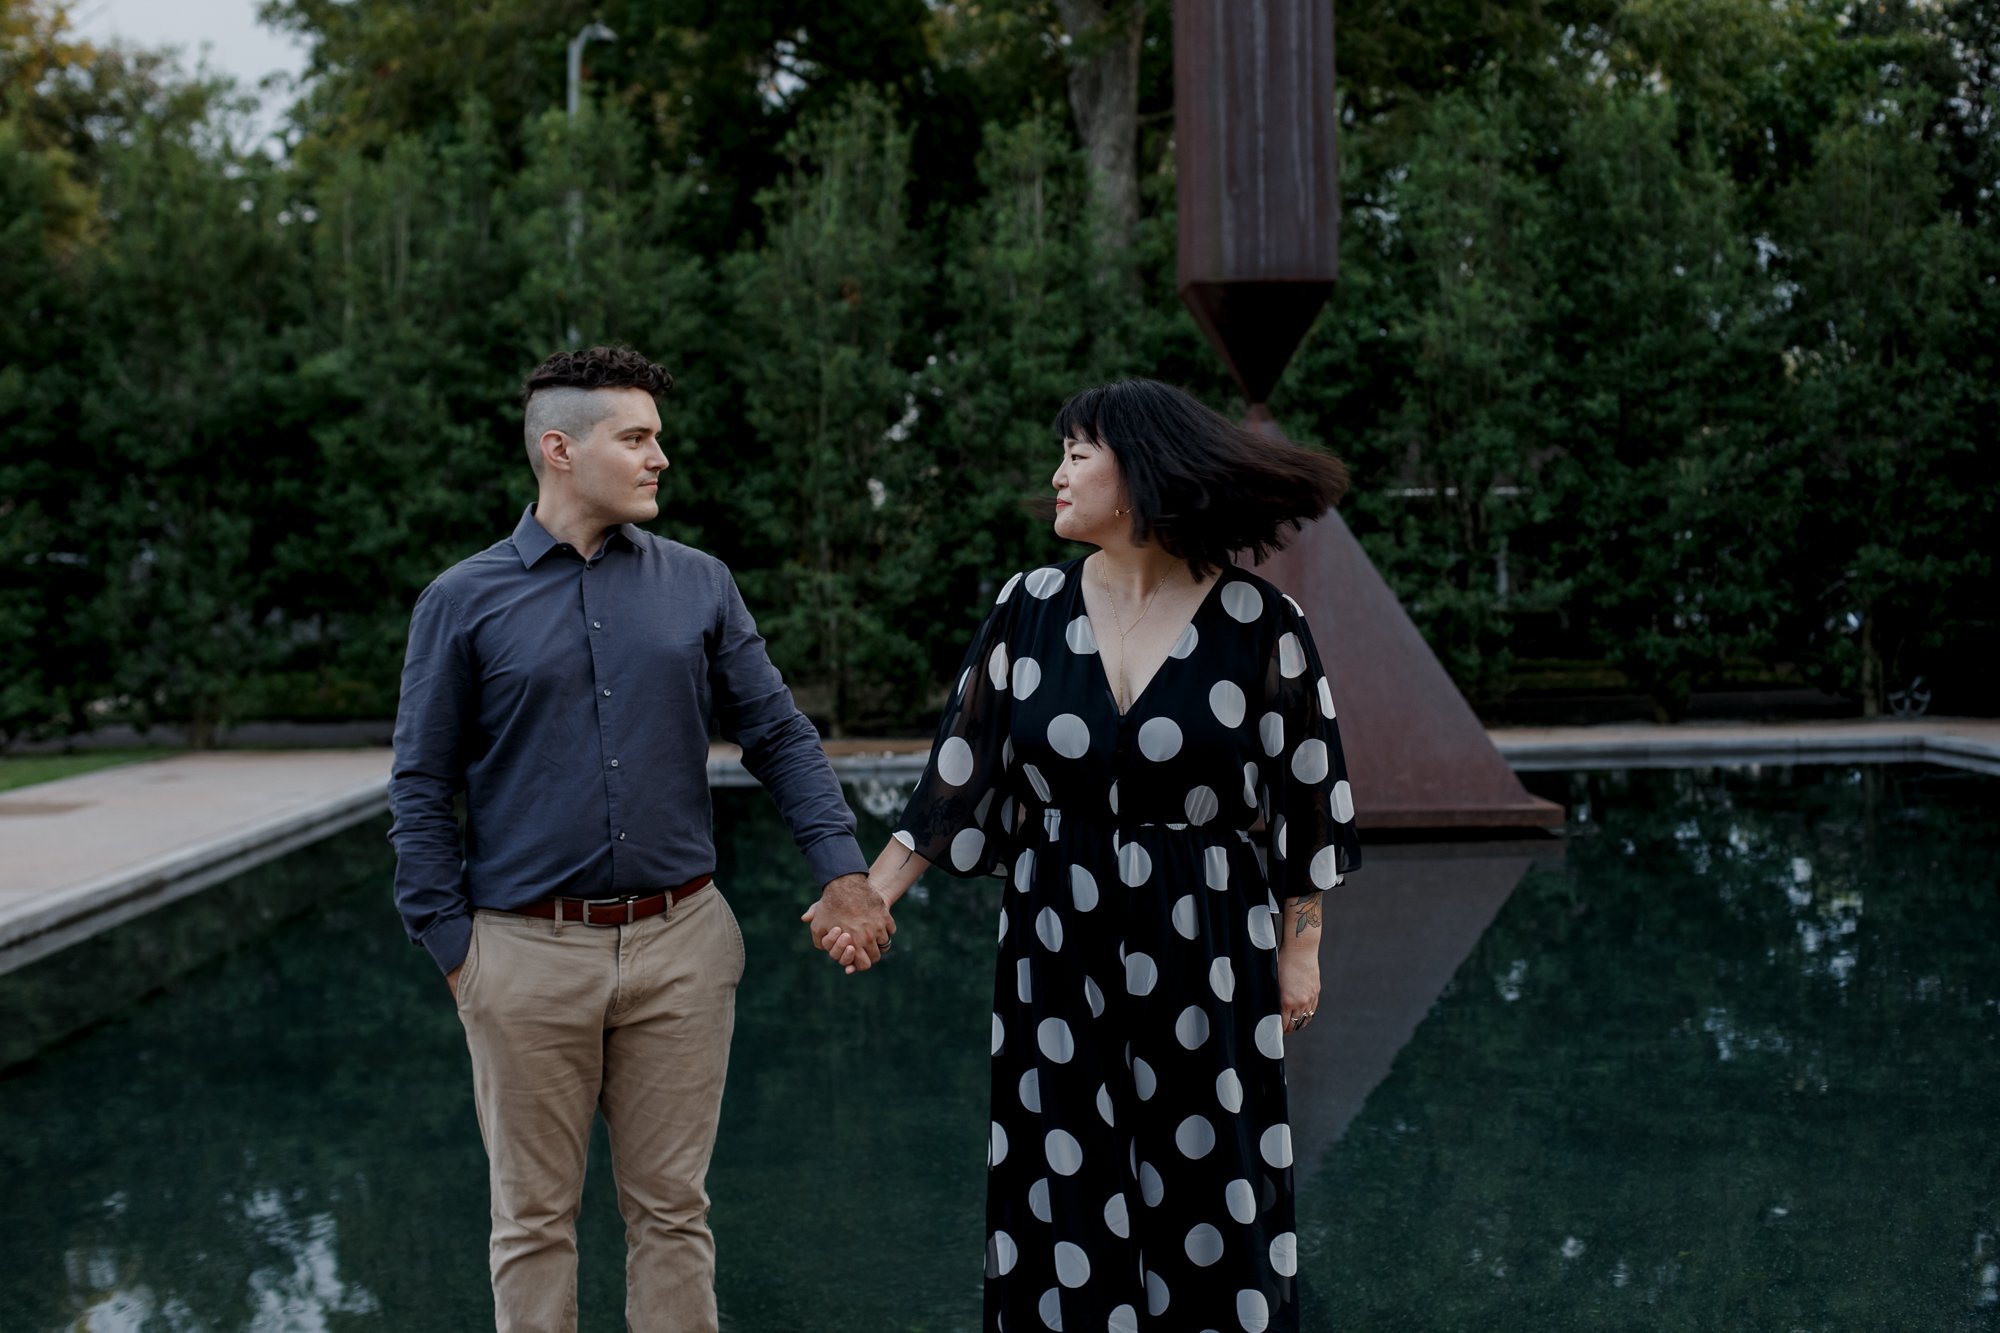 Letting that hair fly - Stylish Polka Dot Dress Engagement Photo Session by Rothko Chapel Sculpture